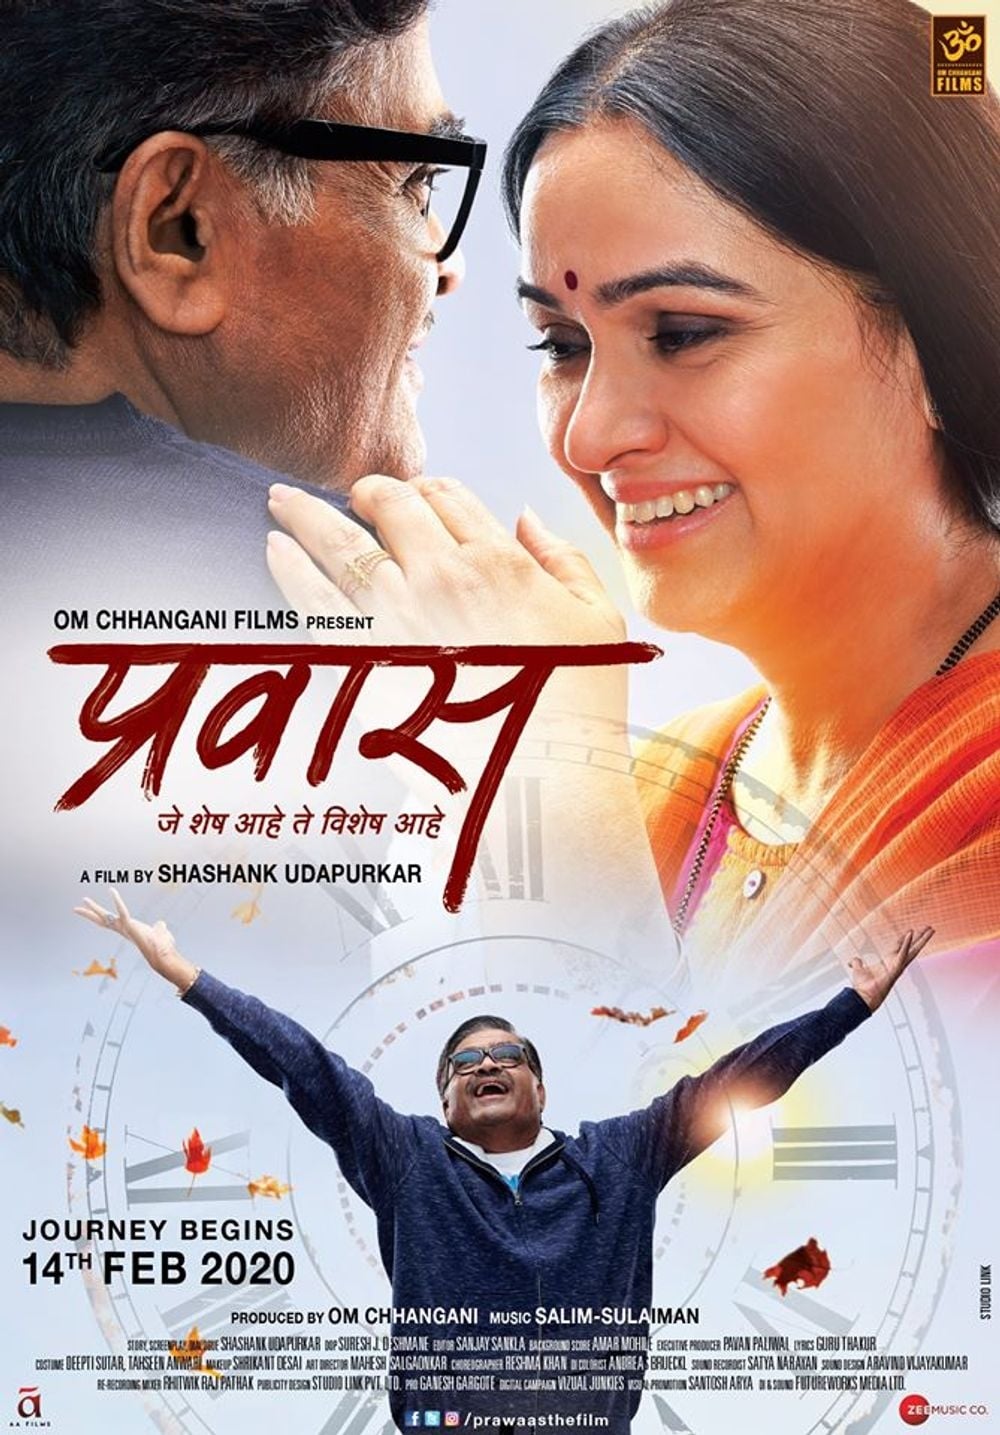 Poster for the movie "Prawaas"